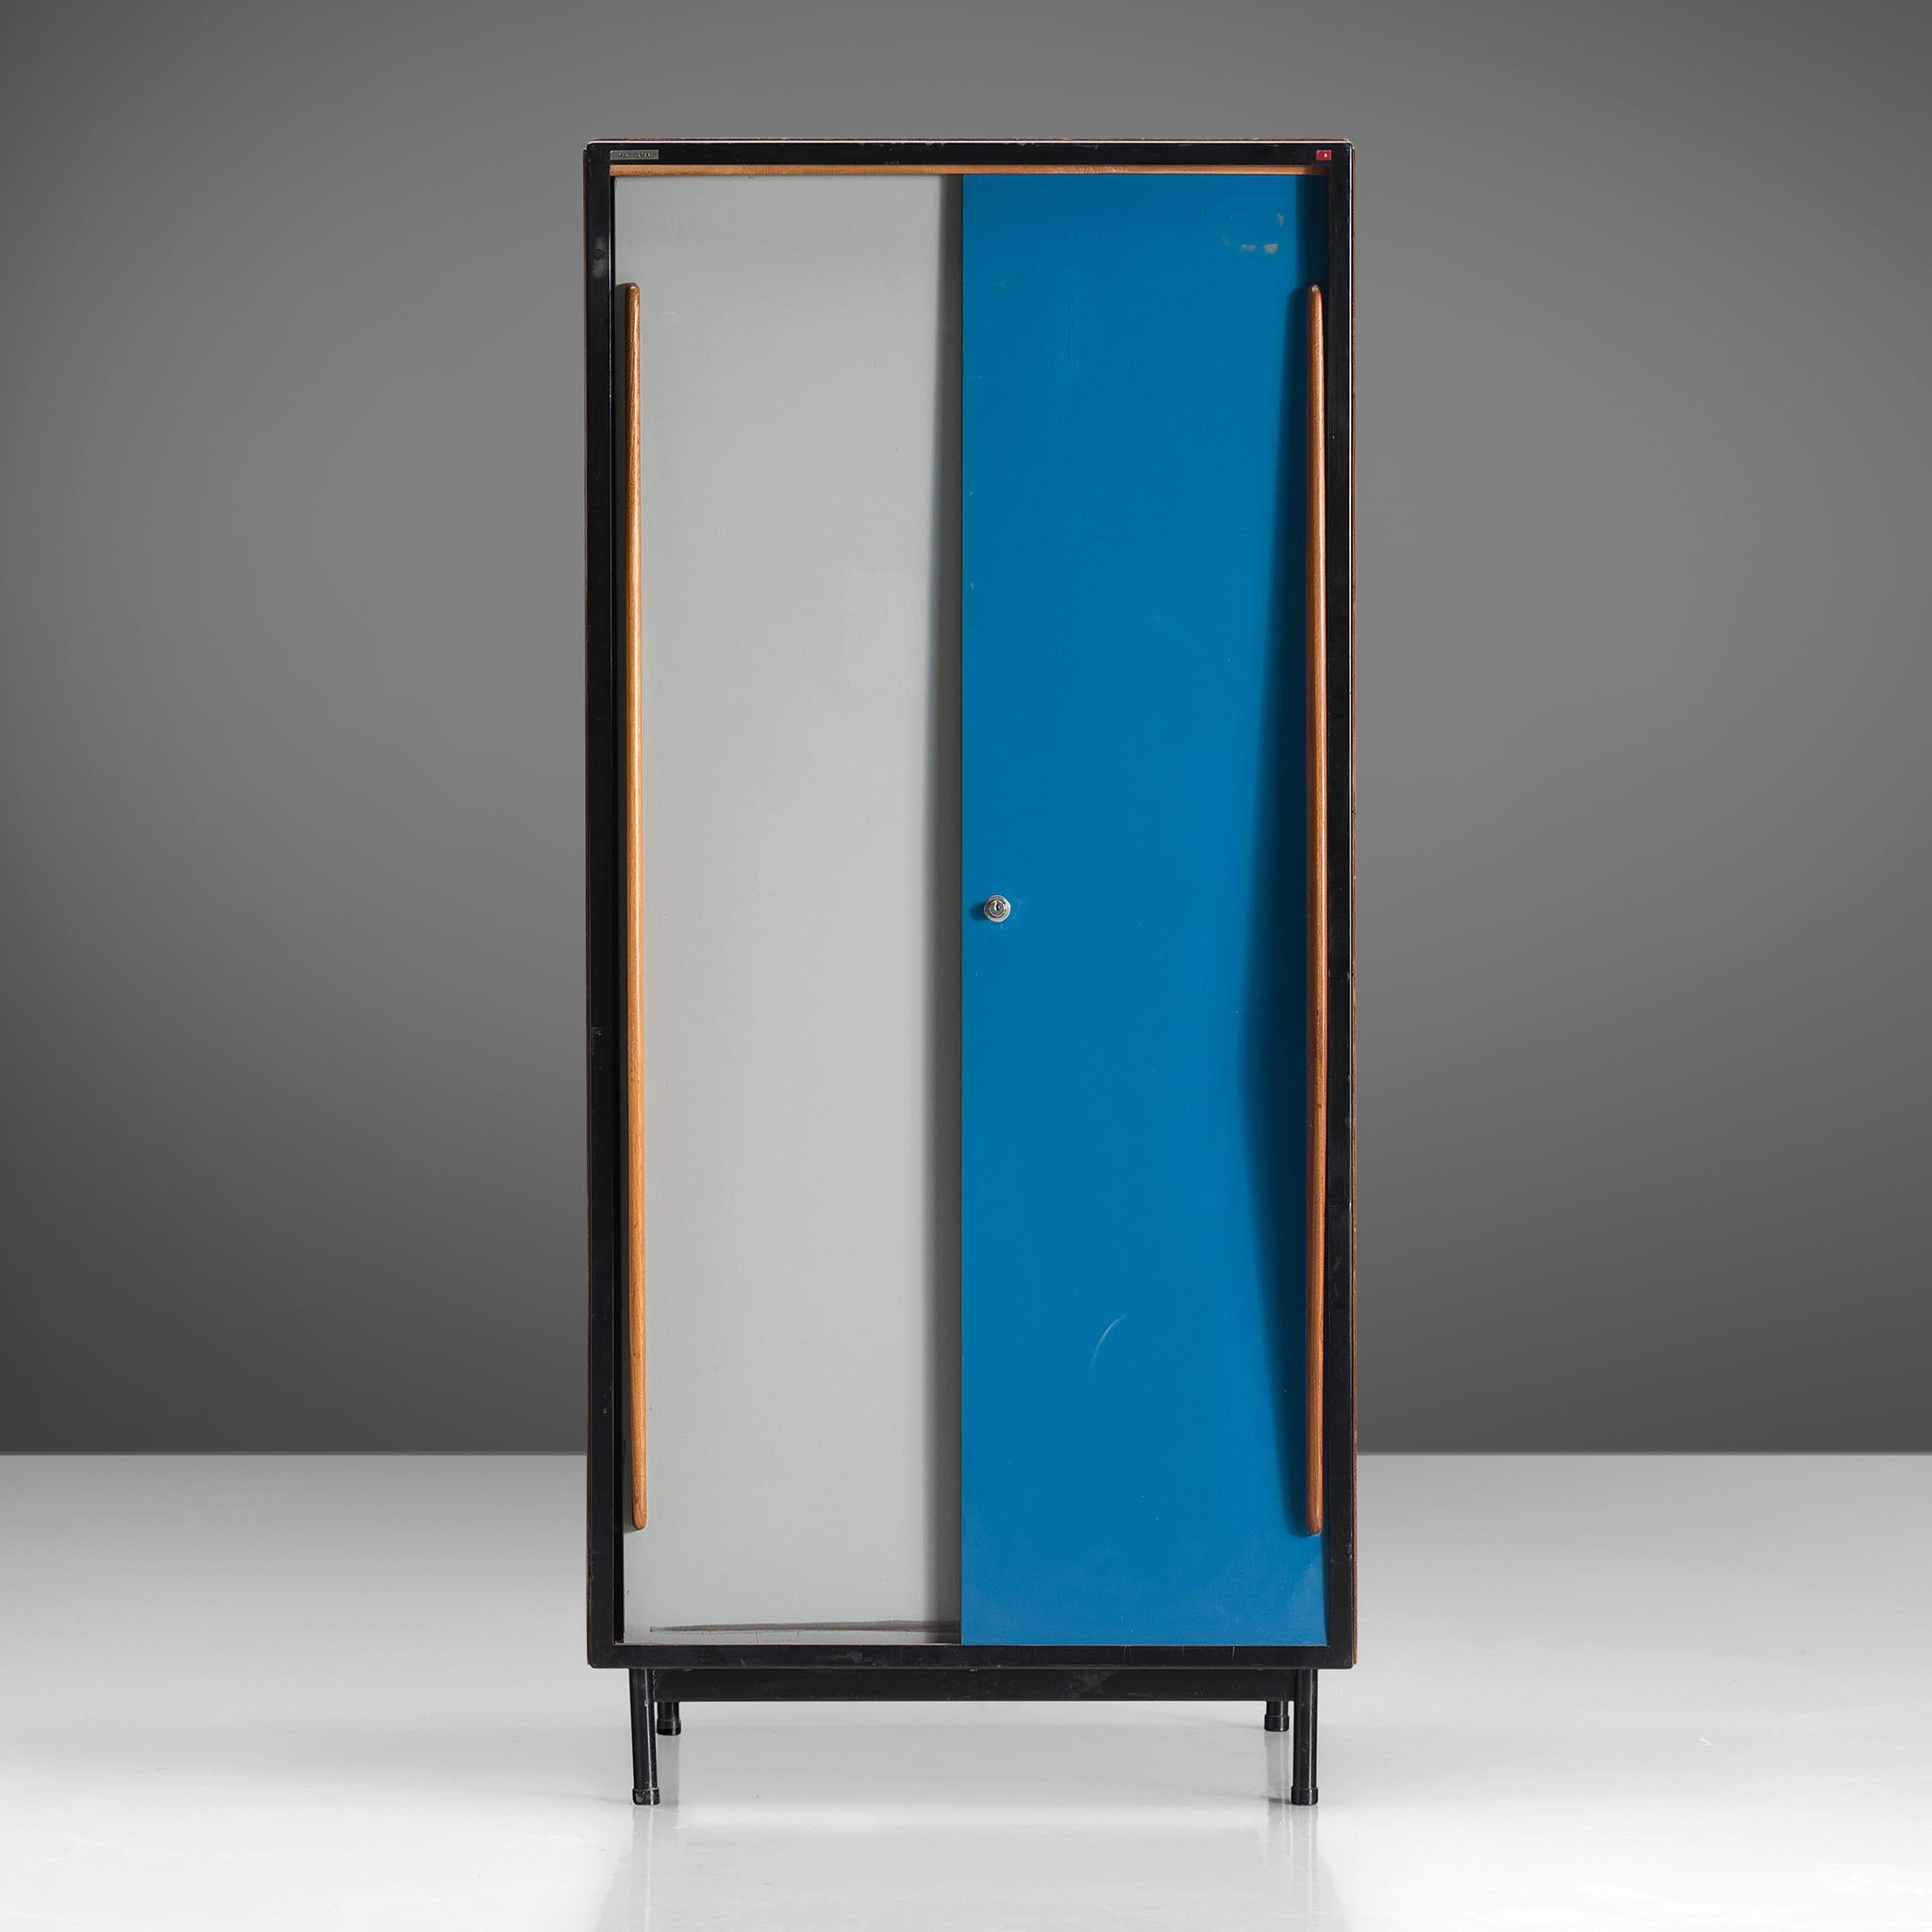 Willy Van Der Meeren for Tubax, cabinet in wood, mahogany and metal by Belgium, 1952. 

Nice early example of Industrial Design from the Belgium modernist stream, designed by Willy Van Der Meeren. Originally designed for use in school buildings